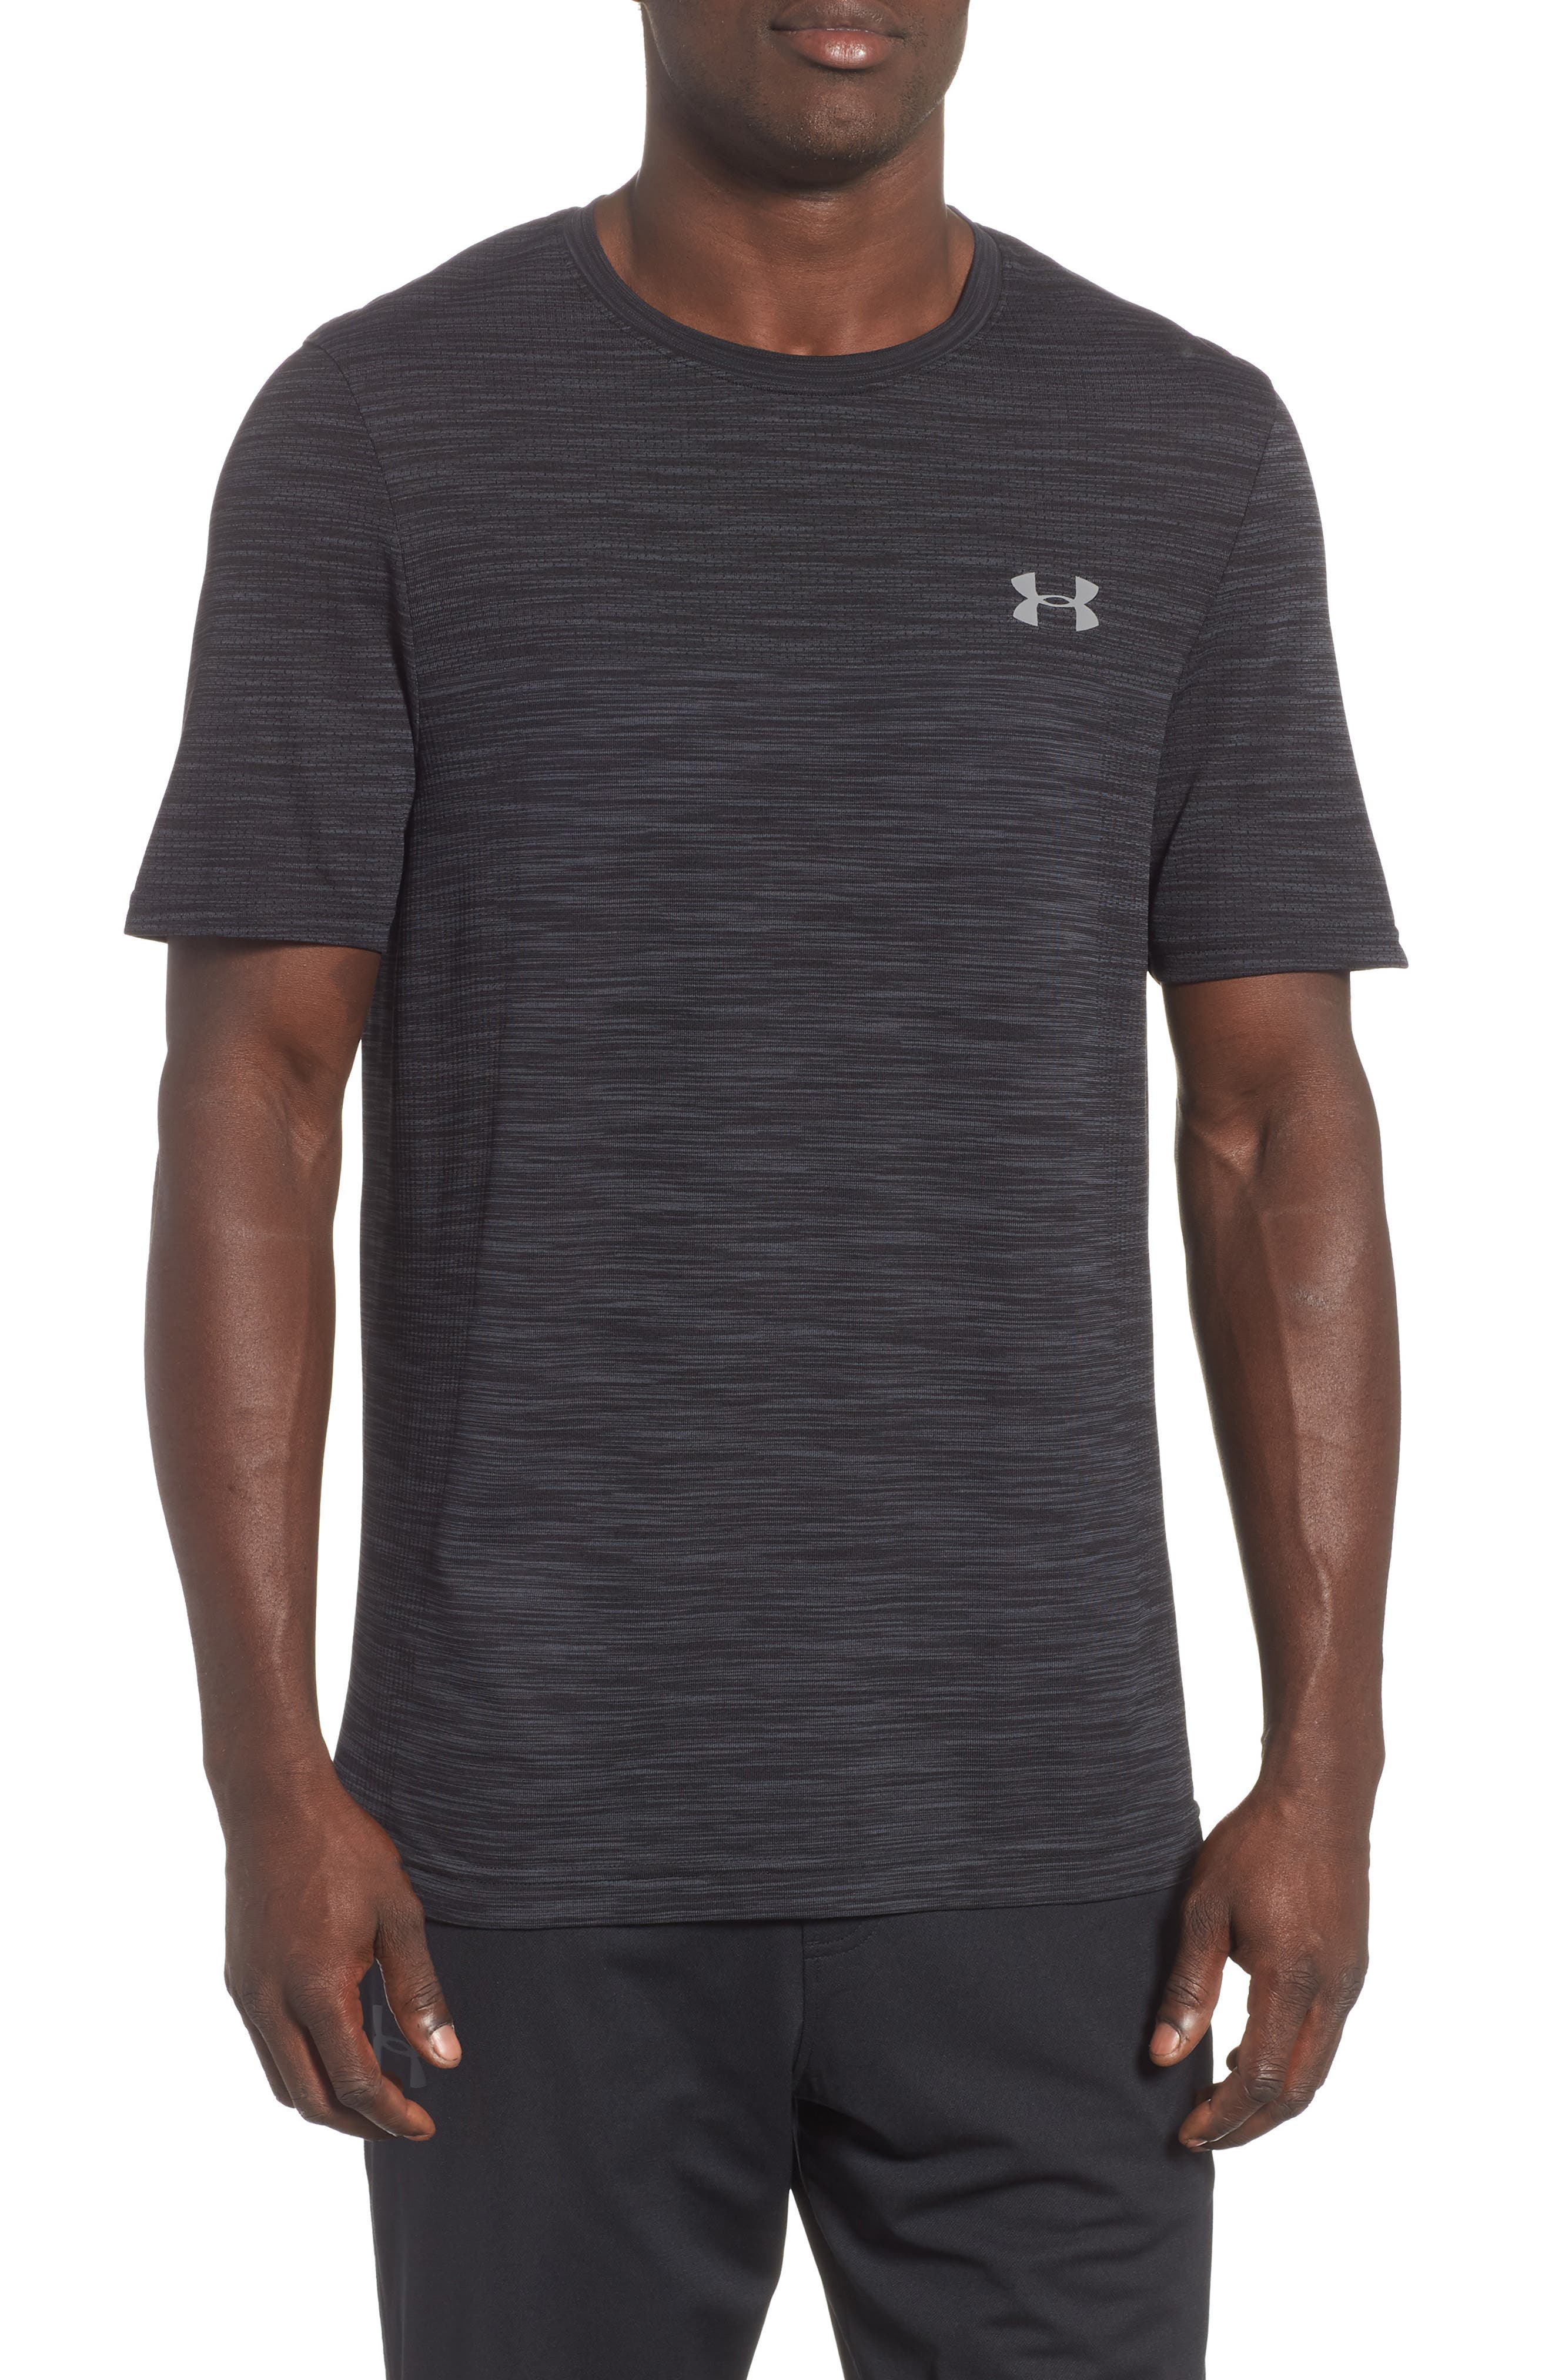 under armour siphon performance athletic shorts